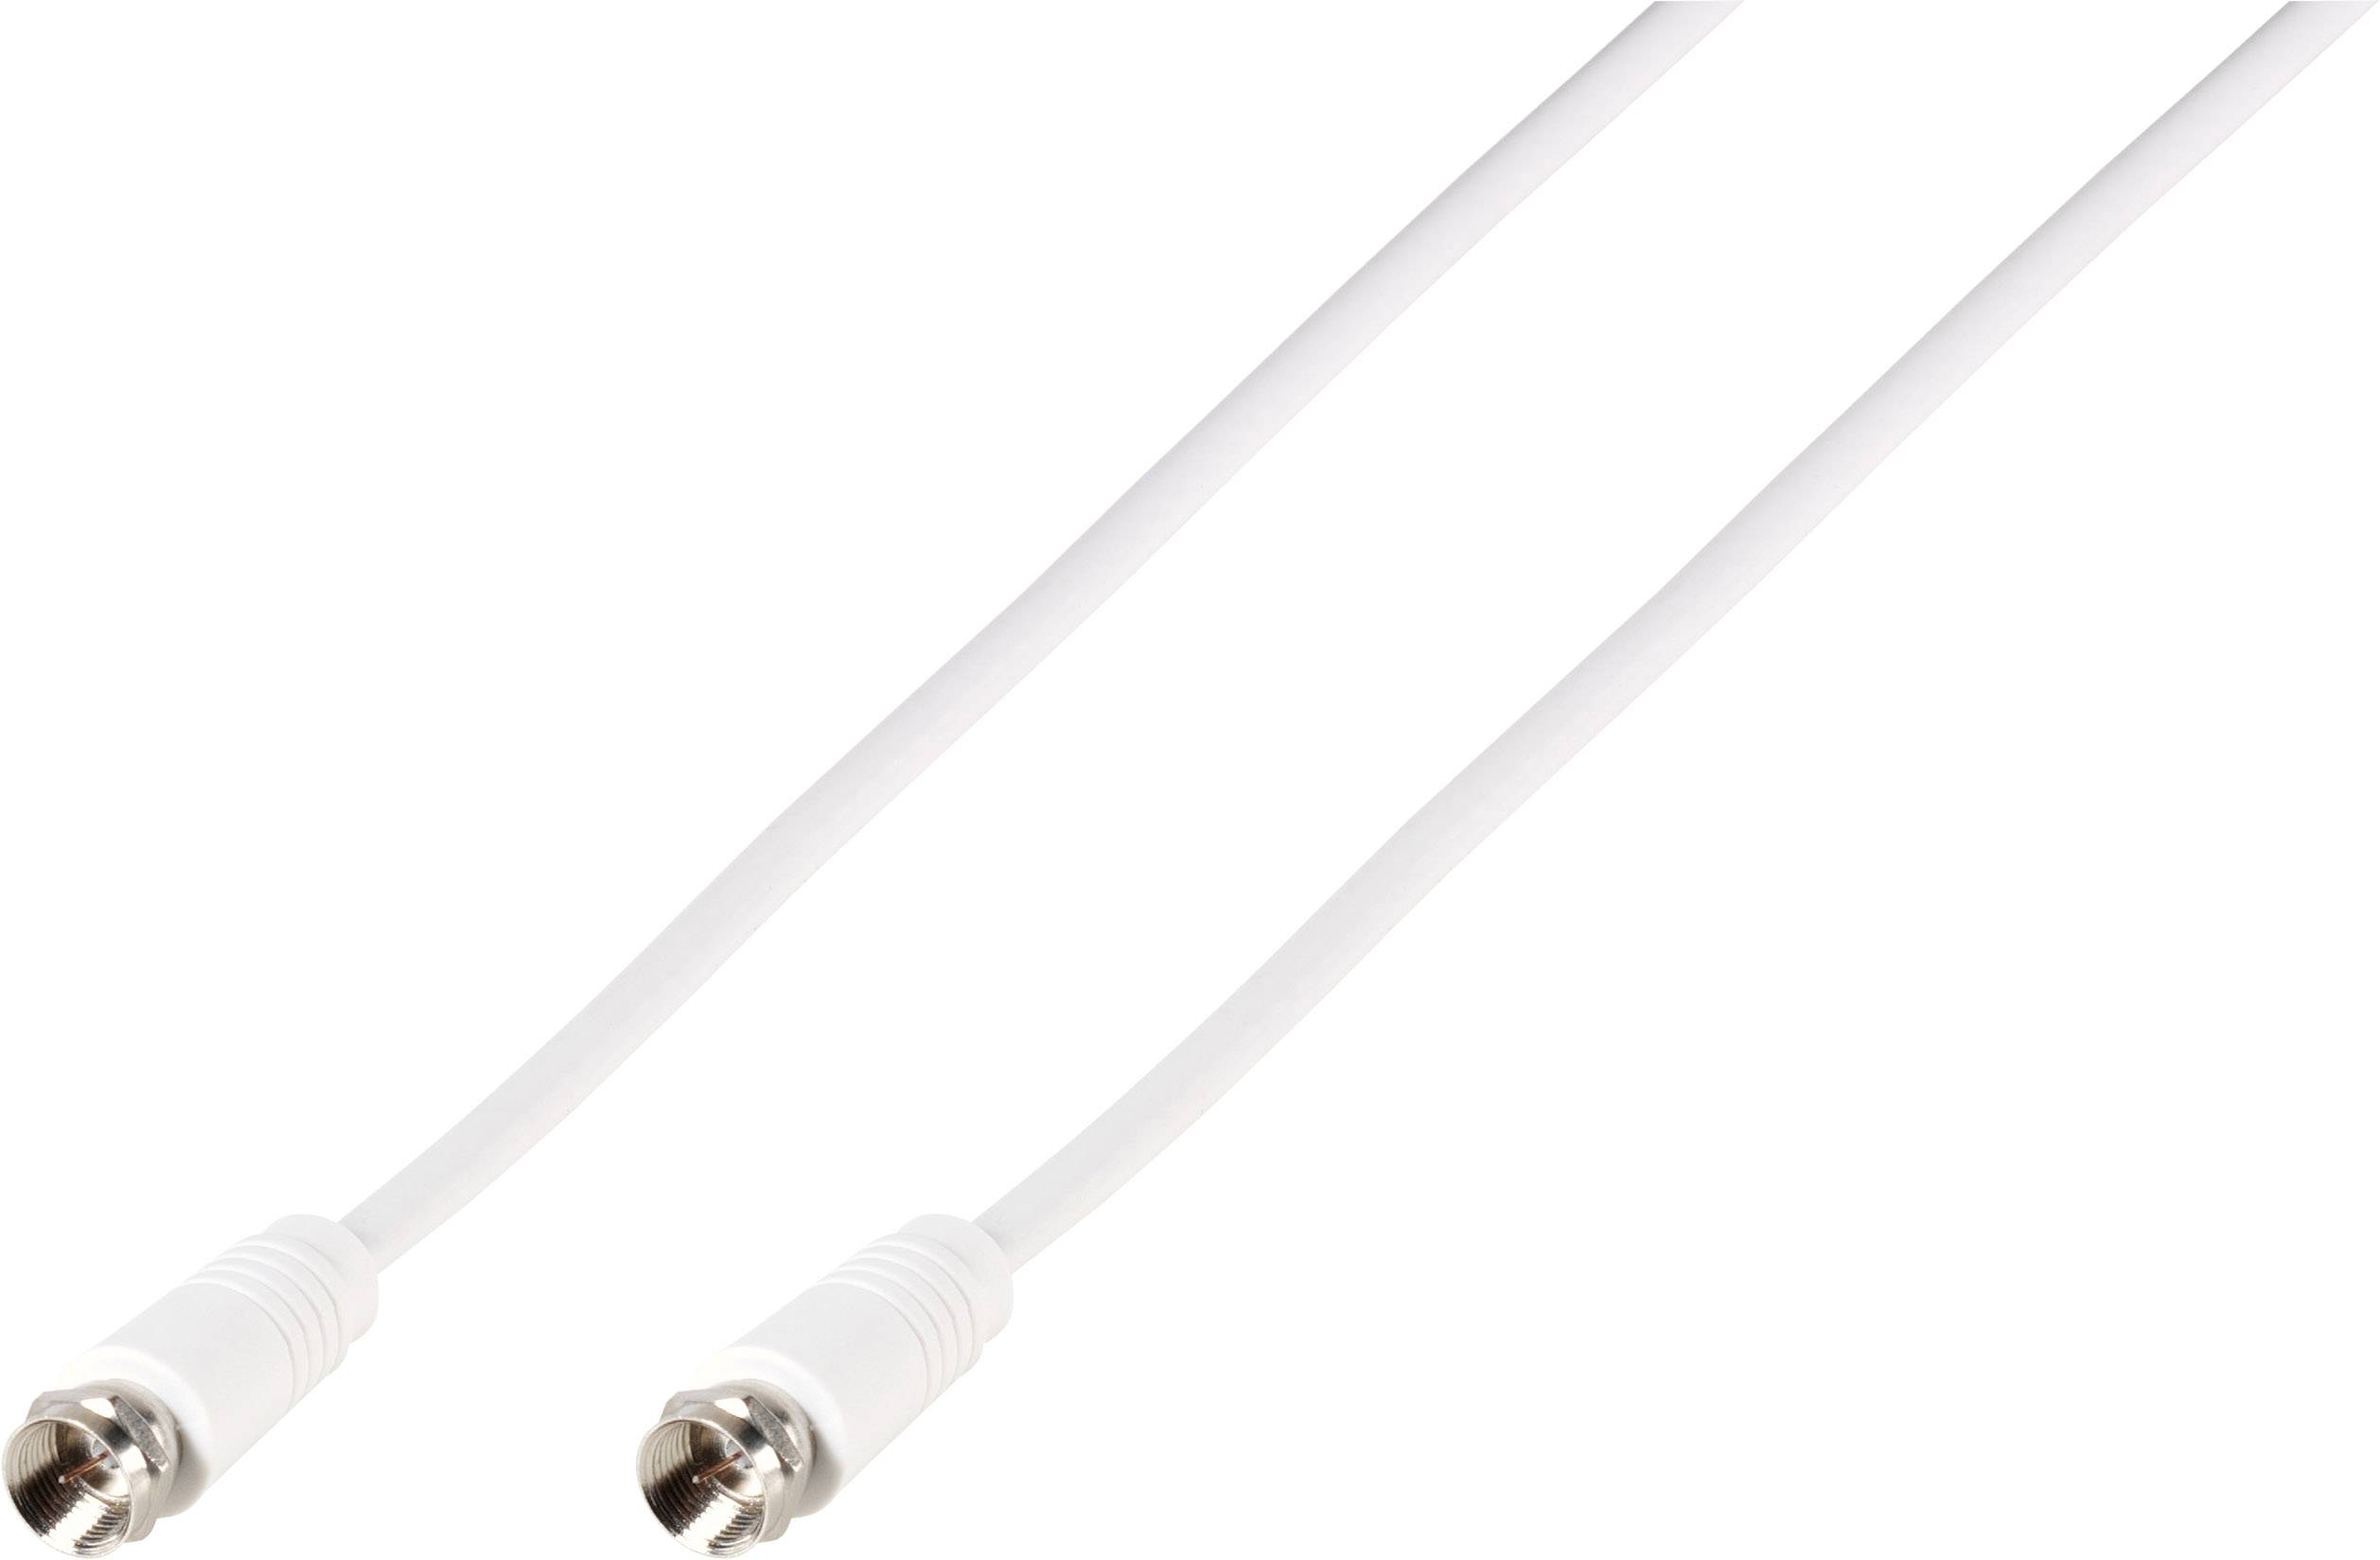 Belkin *FAST DISPATCH* BELKIN ANTENNA CABLE White/Black 90dB Gold Plated  NEW 